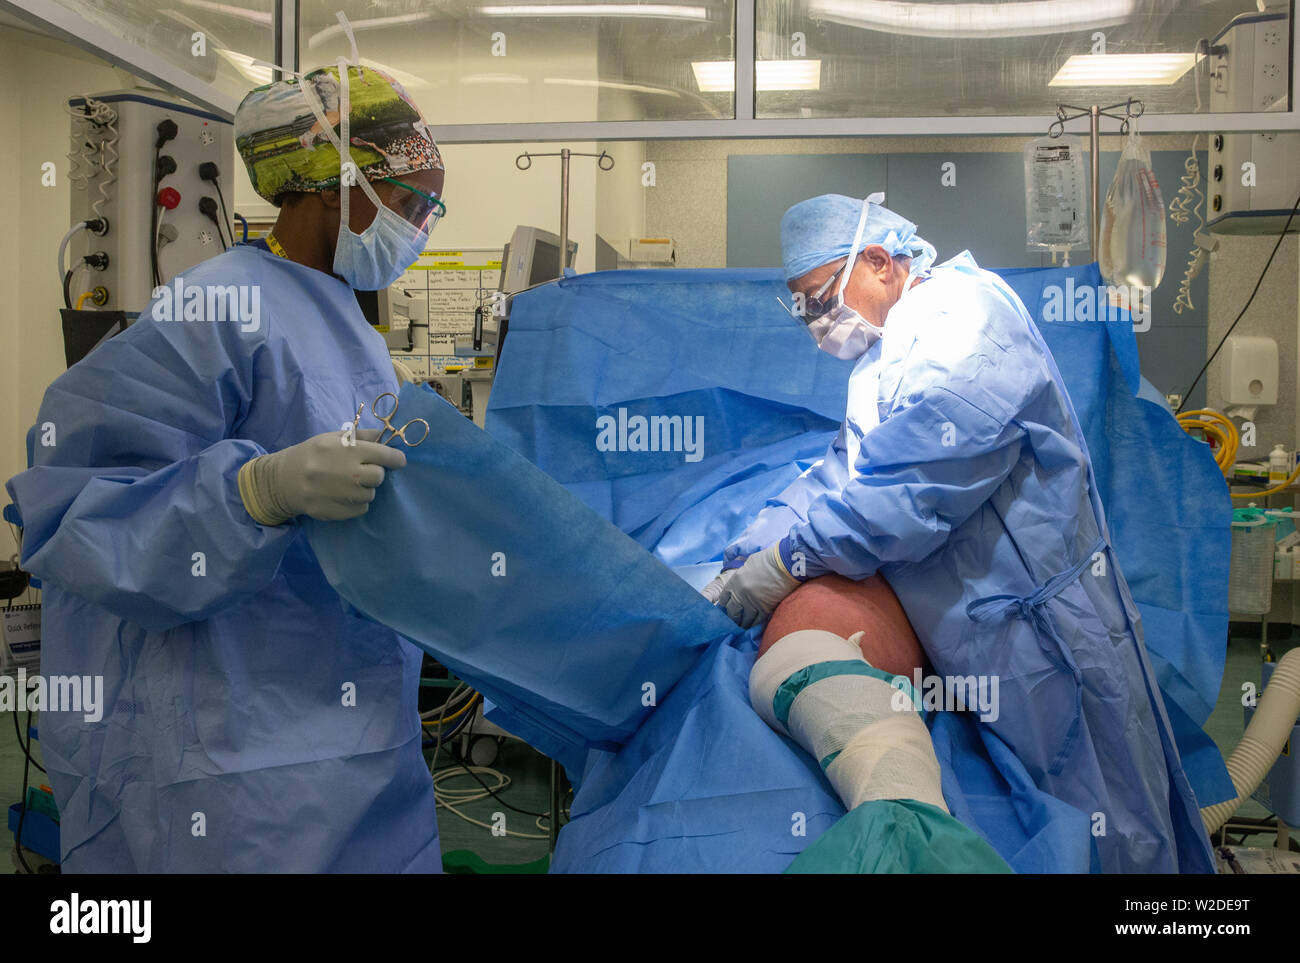 Surgeon And A Nurse Prepare A Patient For A Hip Replacement Operation In An Operating Theatre In